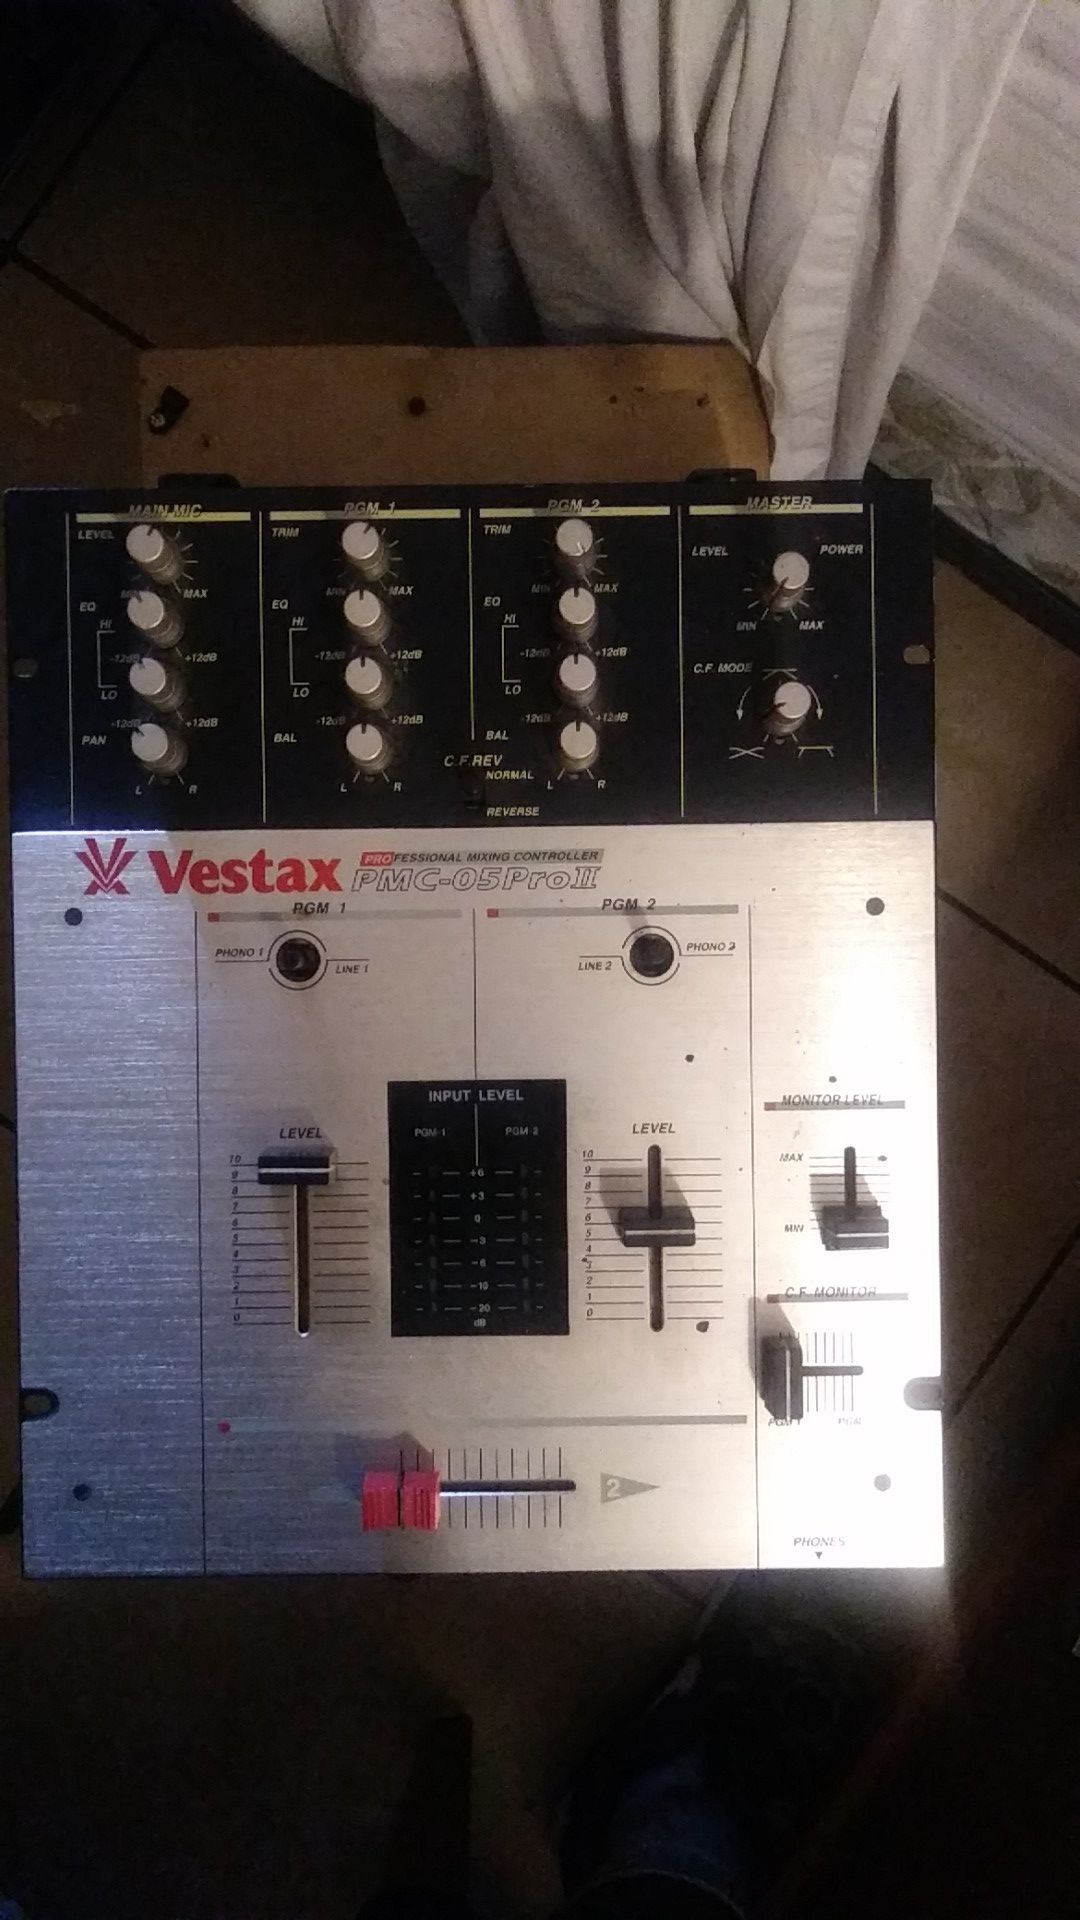 Vestax Proffessinal Mixing Controller ( PMC -05 Pro2